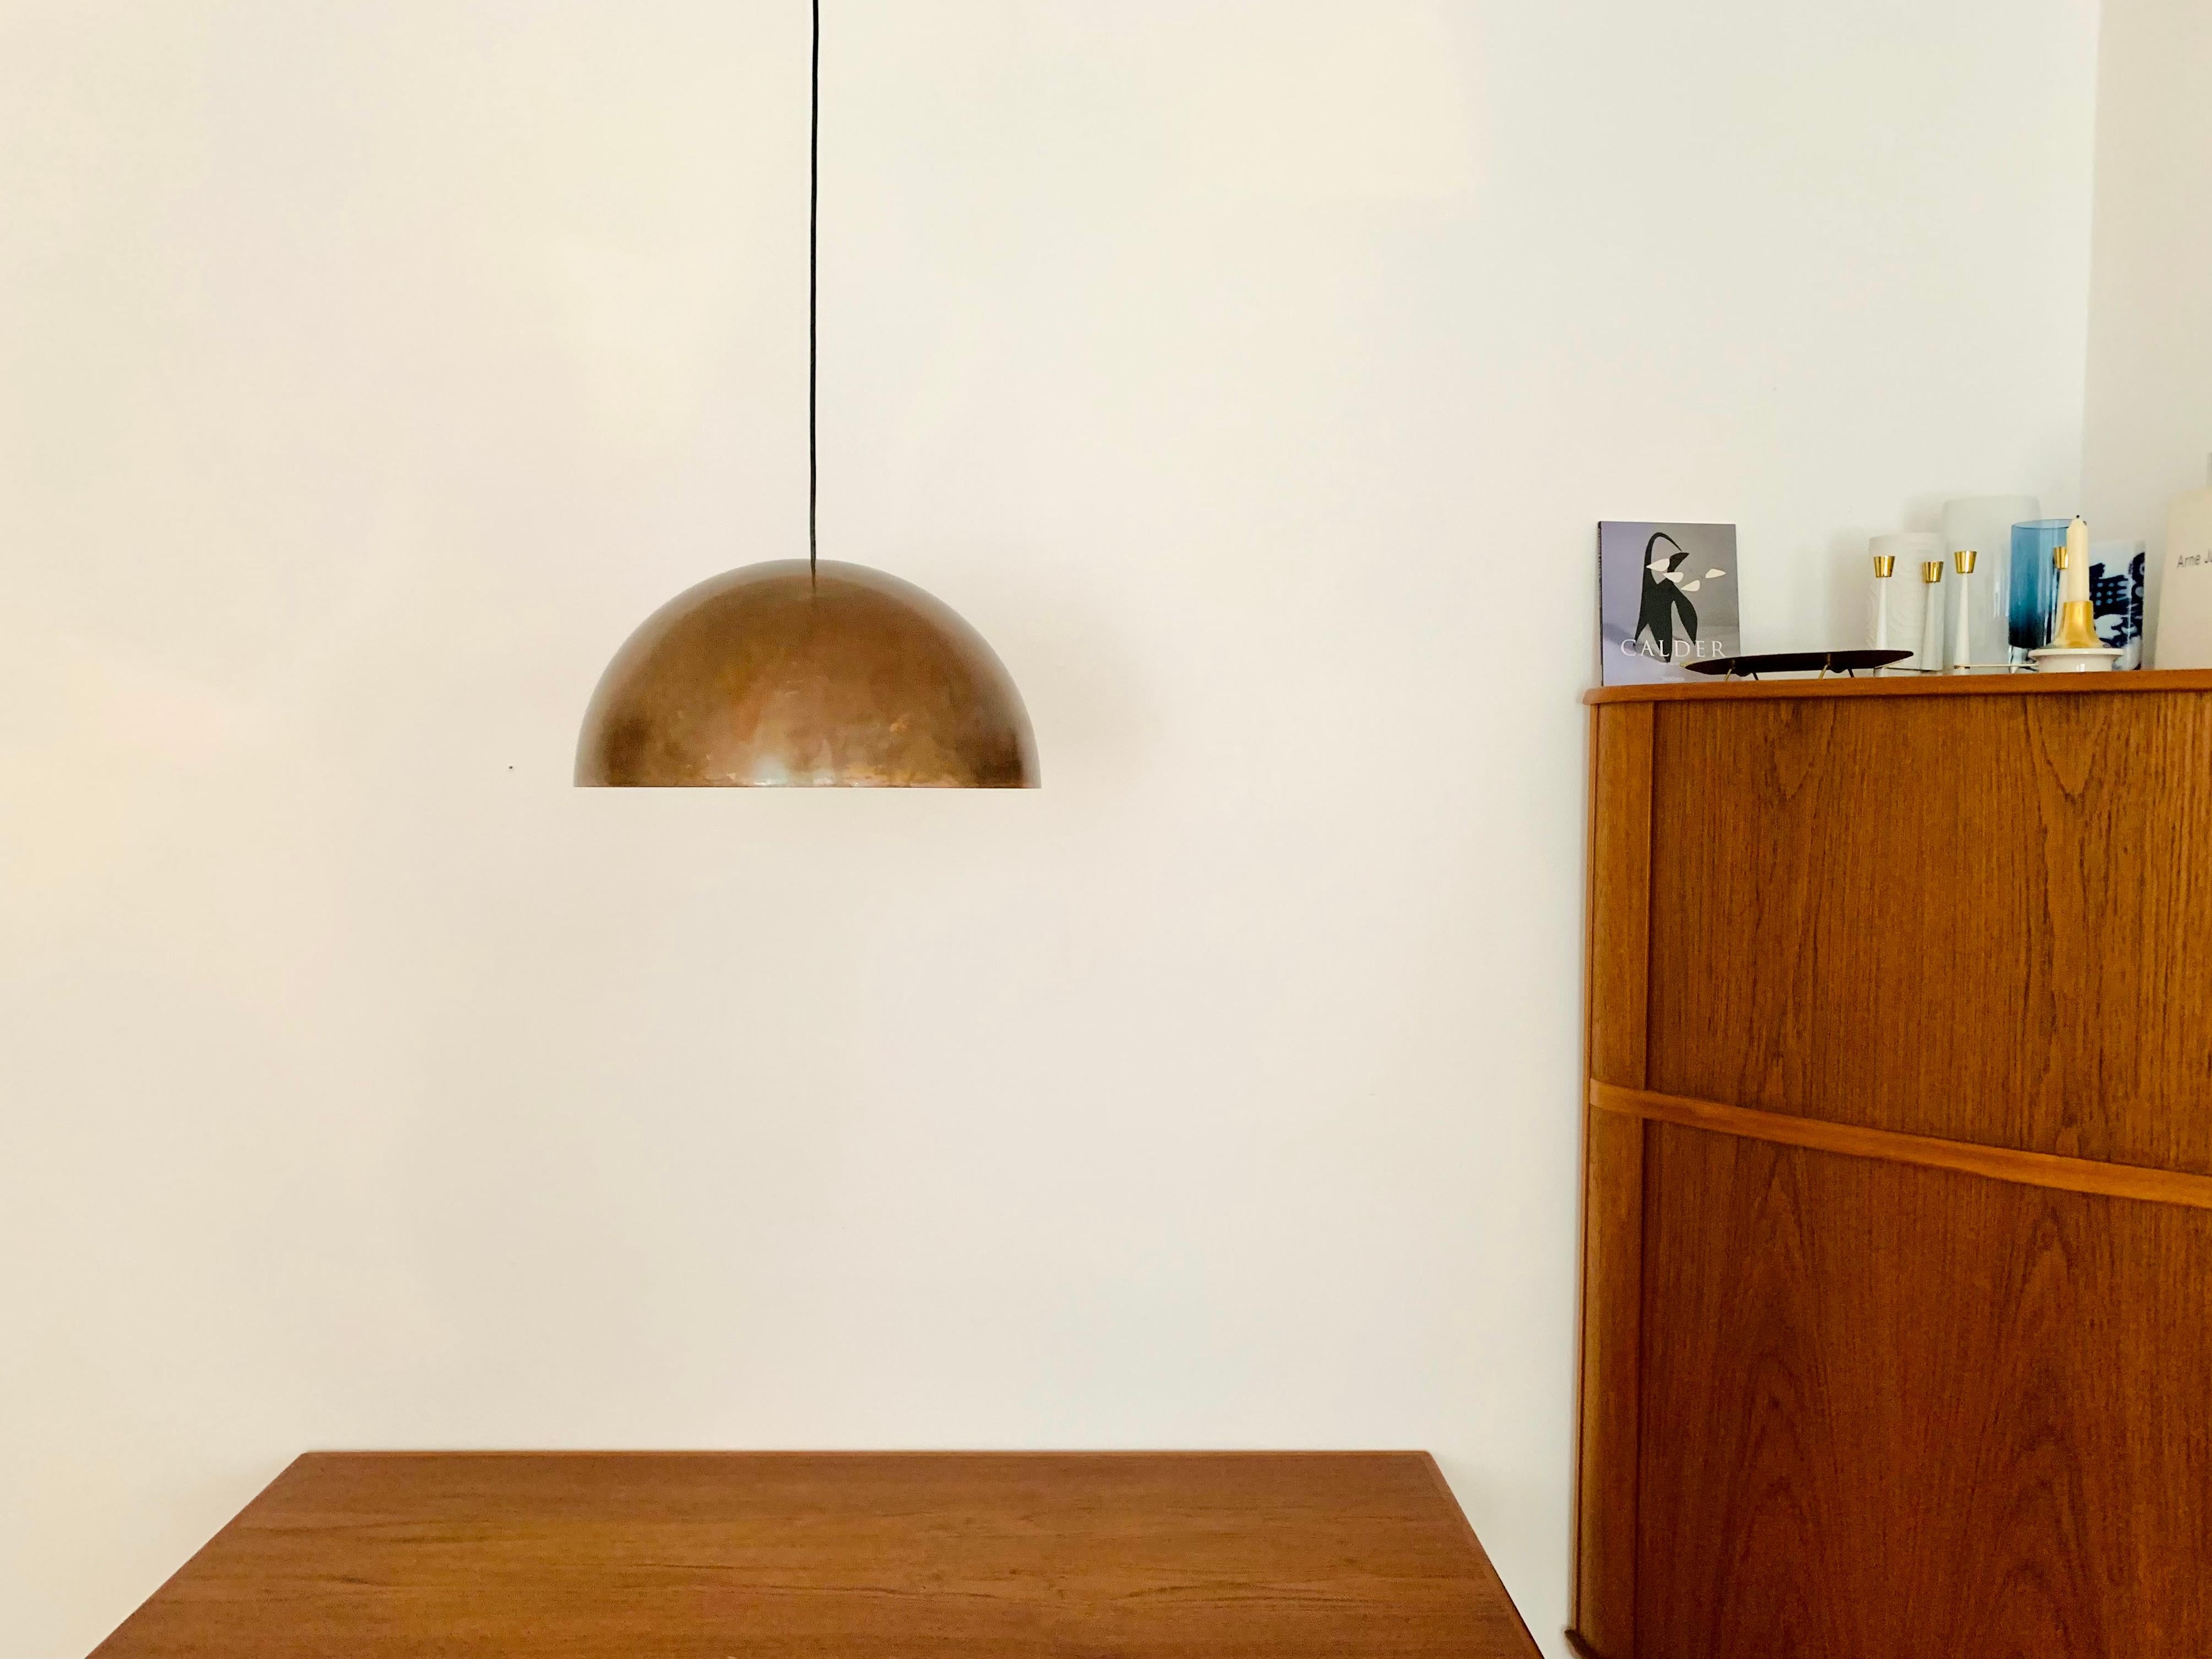 German Large Unique Patinated Copper Dome Pendant Lamp by Beisl For Sale